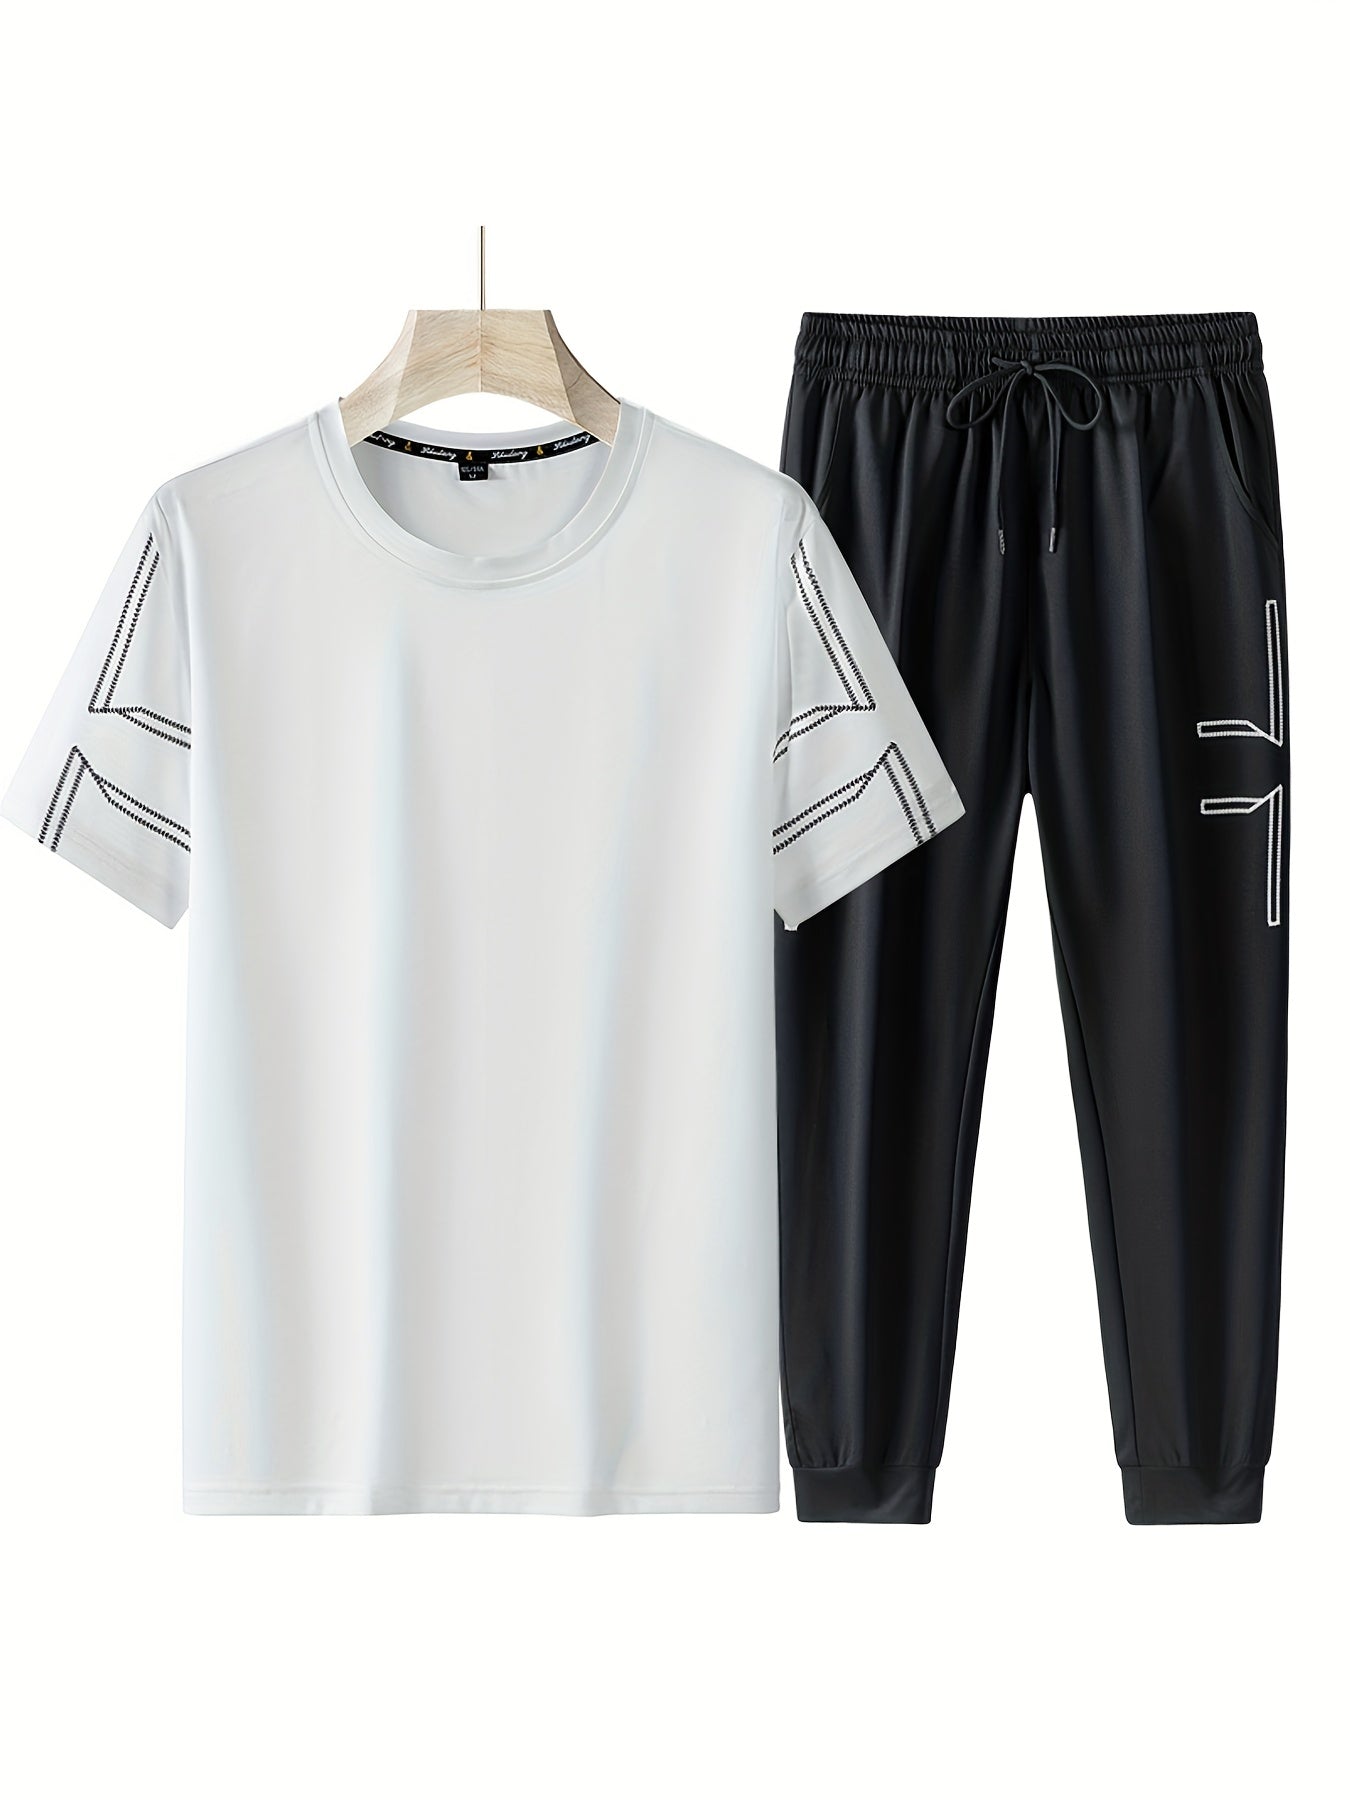 Men's 2 Piece Outfits, Geometric Line Pattern Comfy Casual T-shirt And Loose Drawstring Jogger Pants Set, Mens Clothing